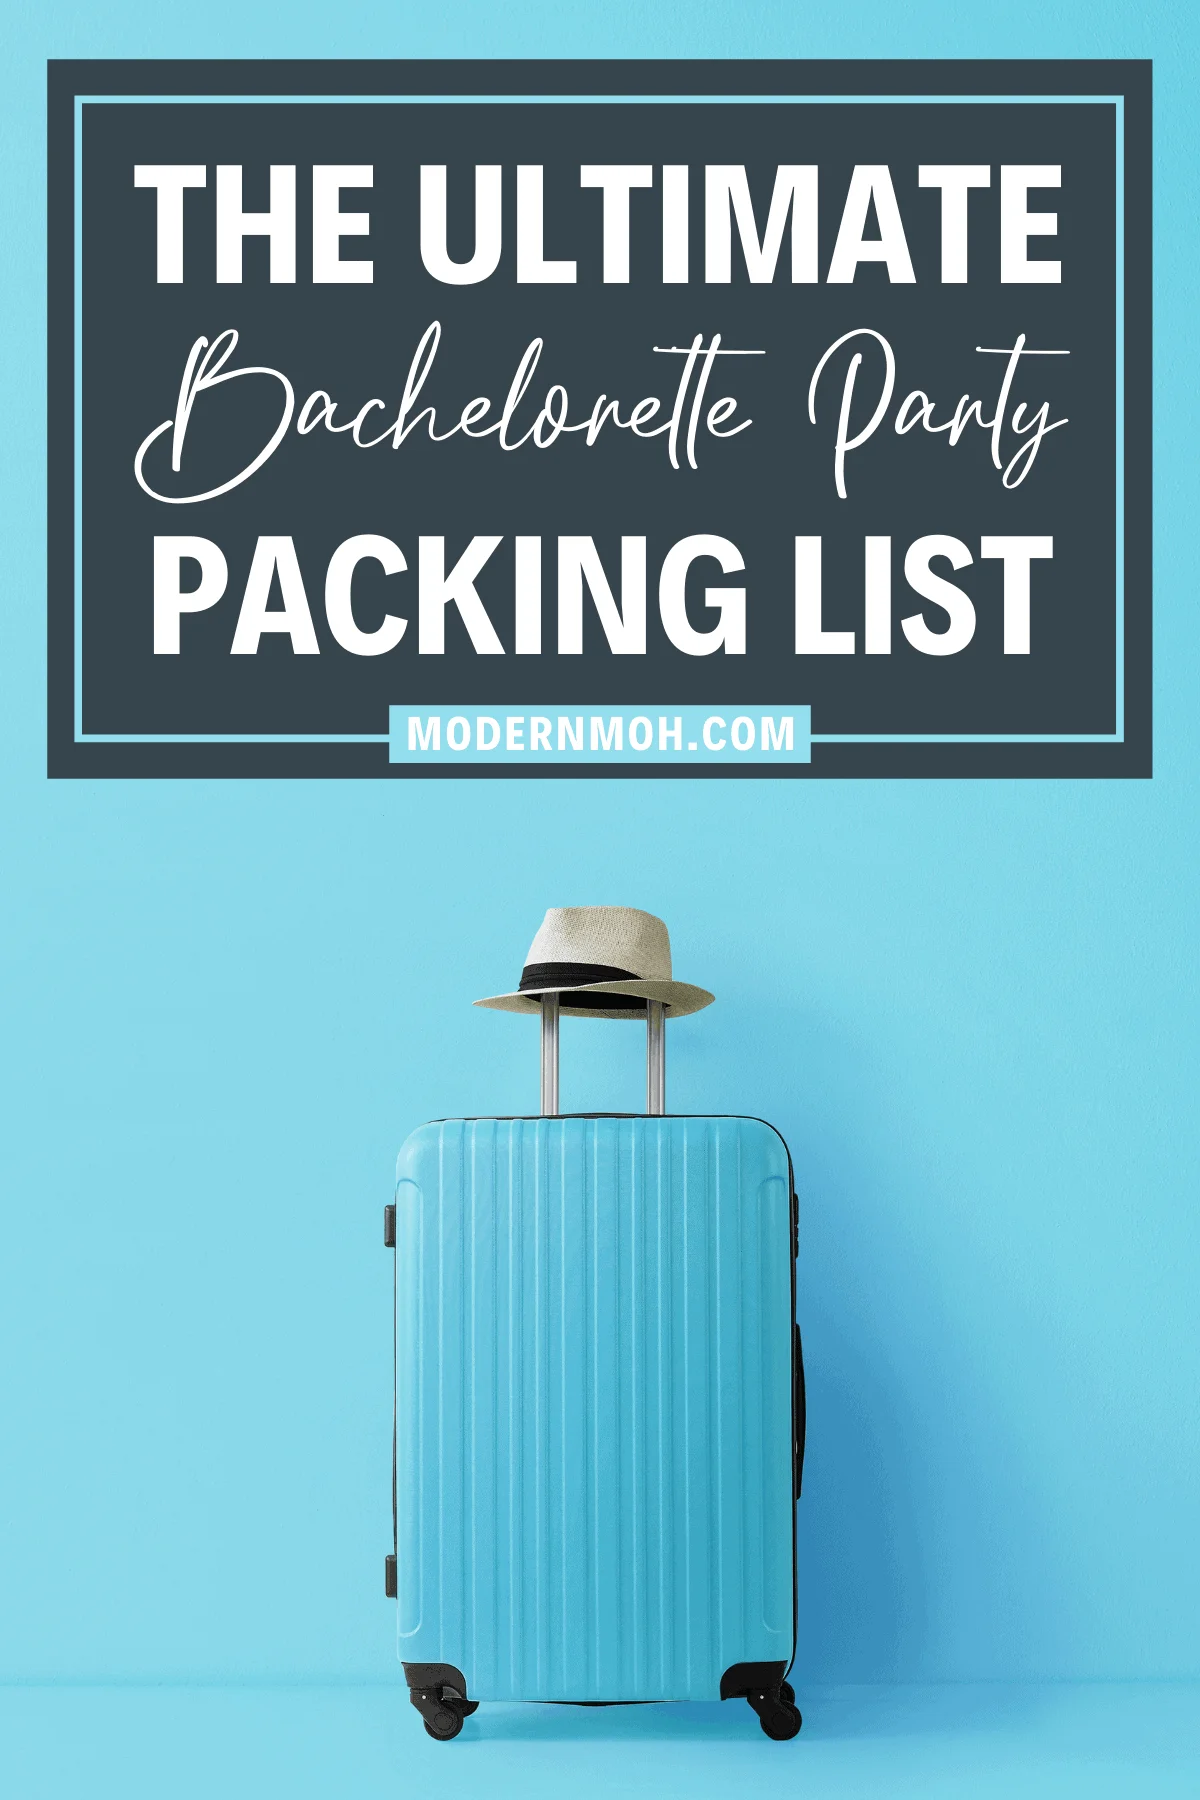 What to Bring to a Bachelorette Party: The Ultimate Packing List